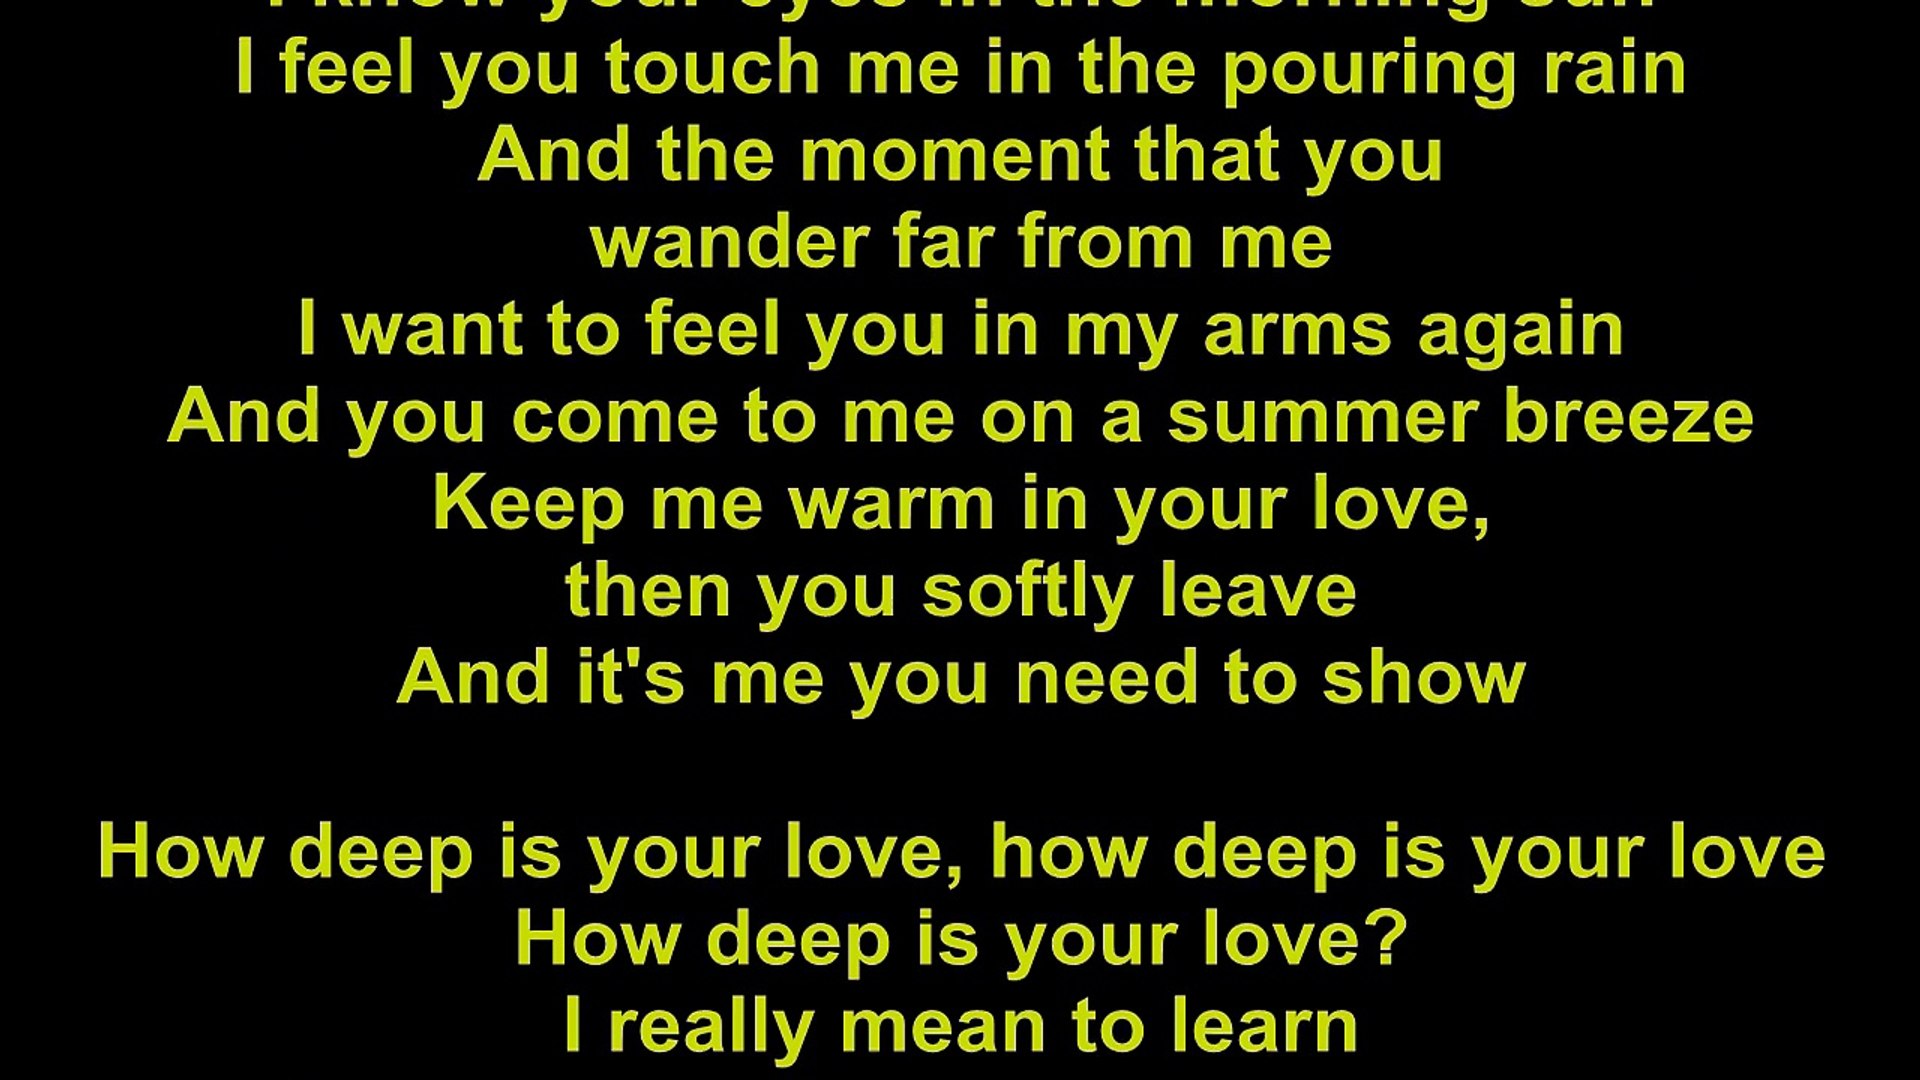 Bee Gees – How Deep Is Your Love Lyrics - video Dailymotion